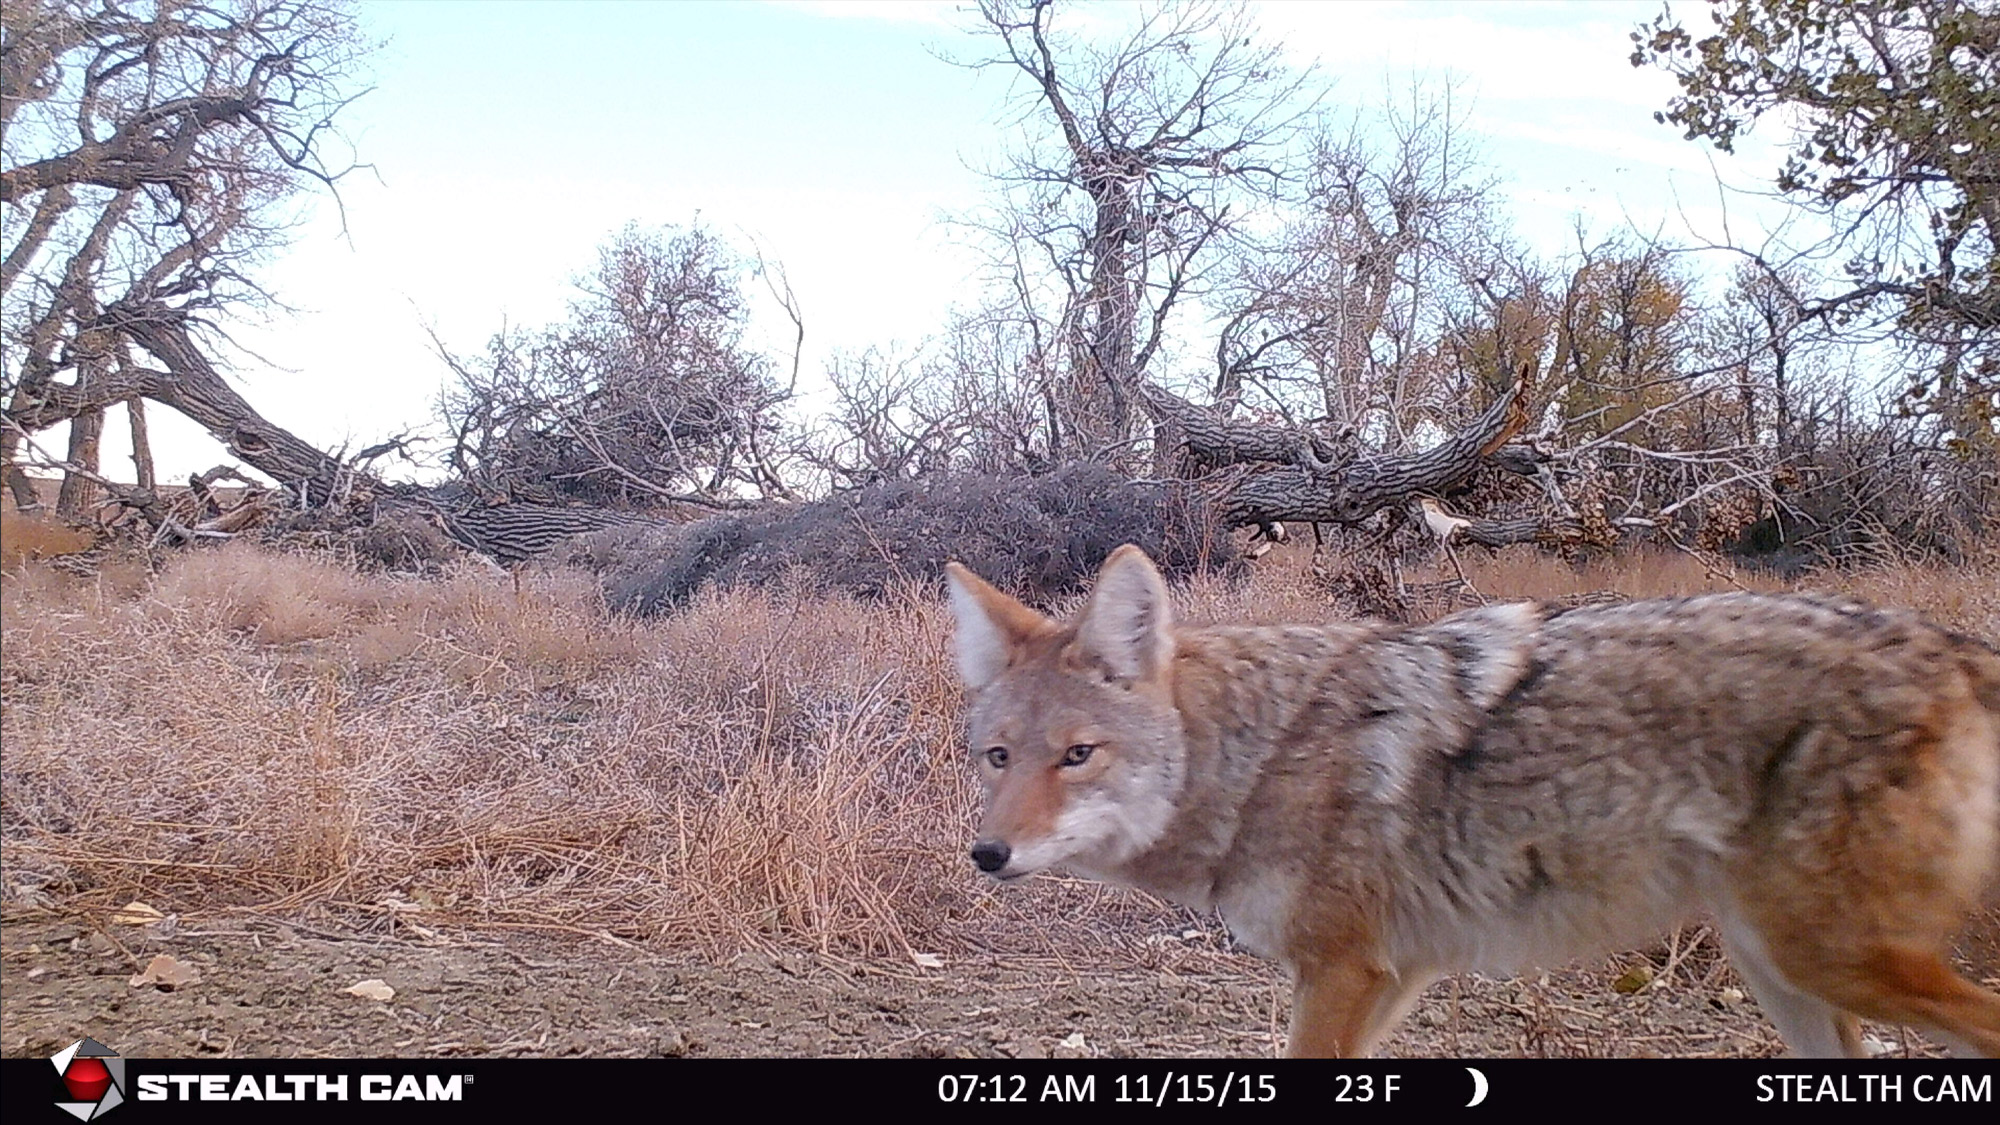 Trail camera took a picture of a coyote